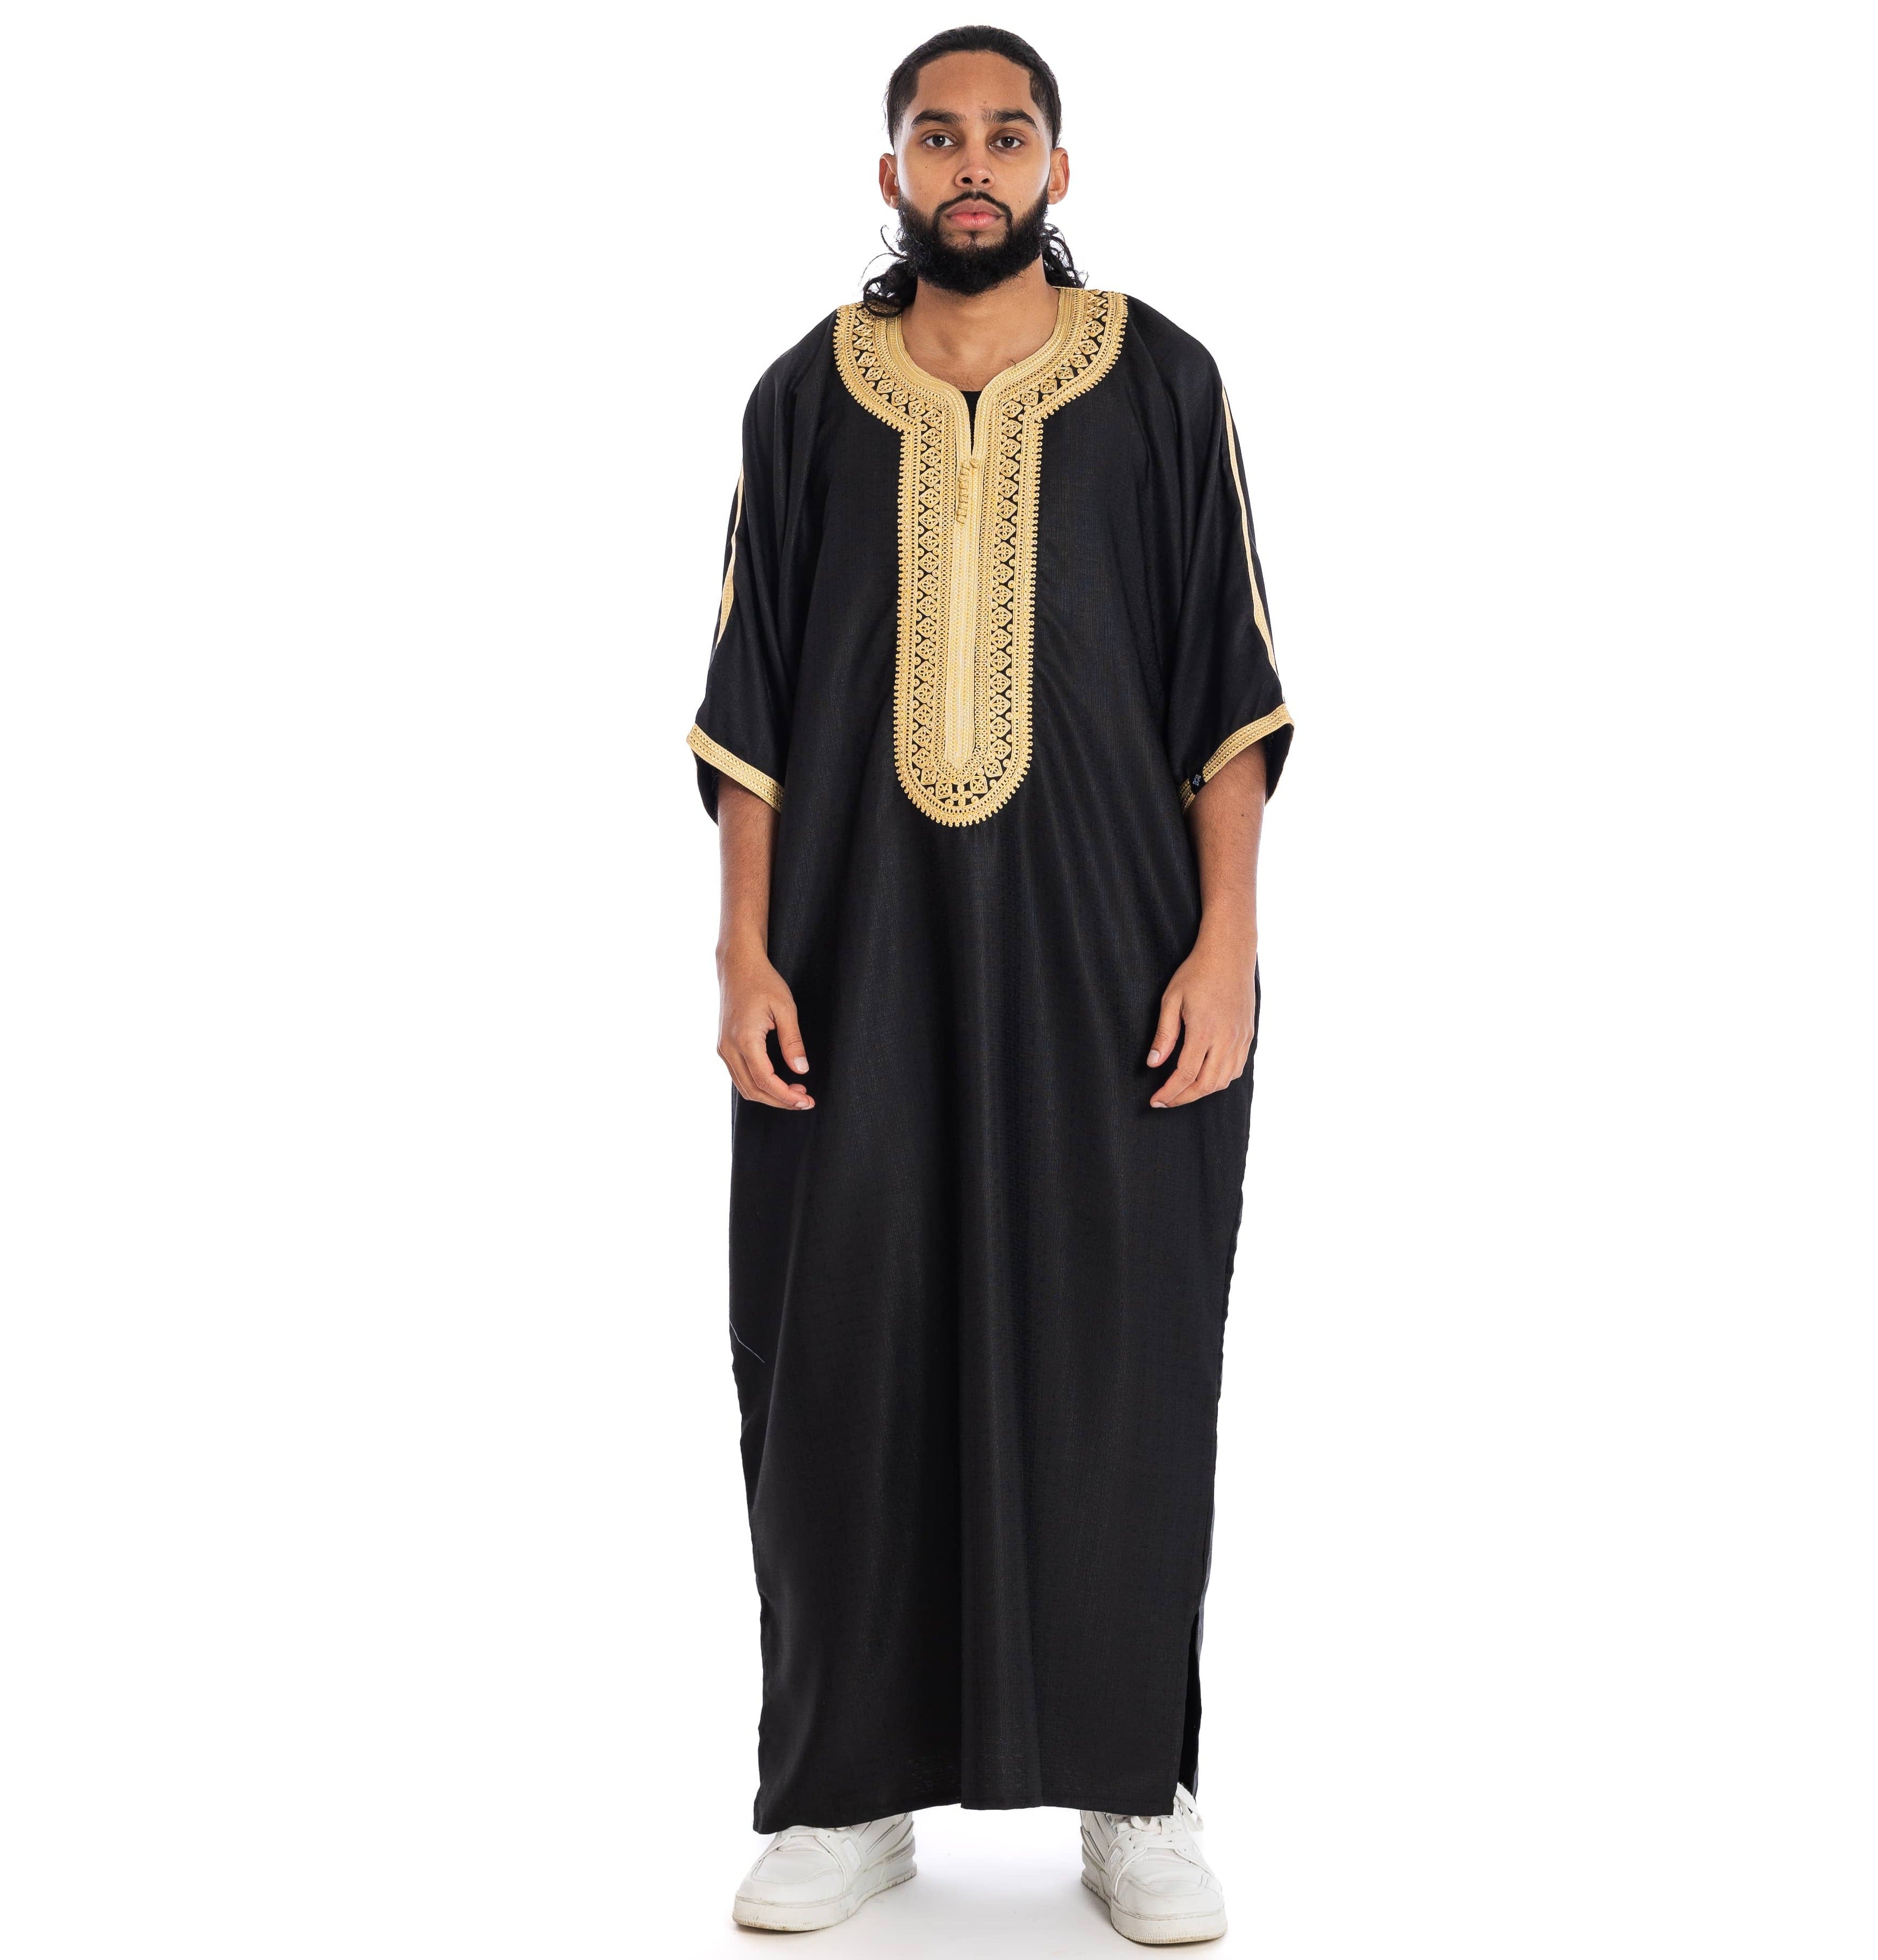 Black and Gold Essential linen moroccan thobe Collection - newarabia Apparel & Accessories